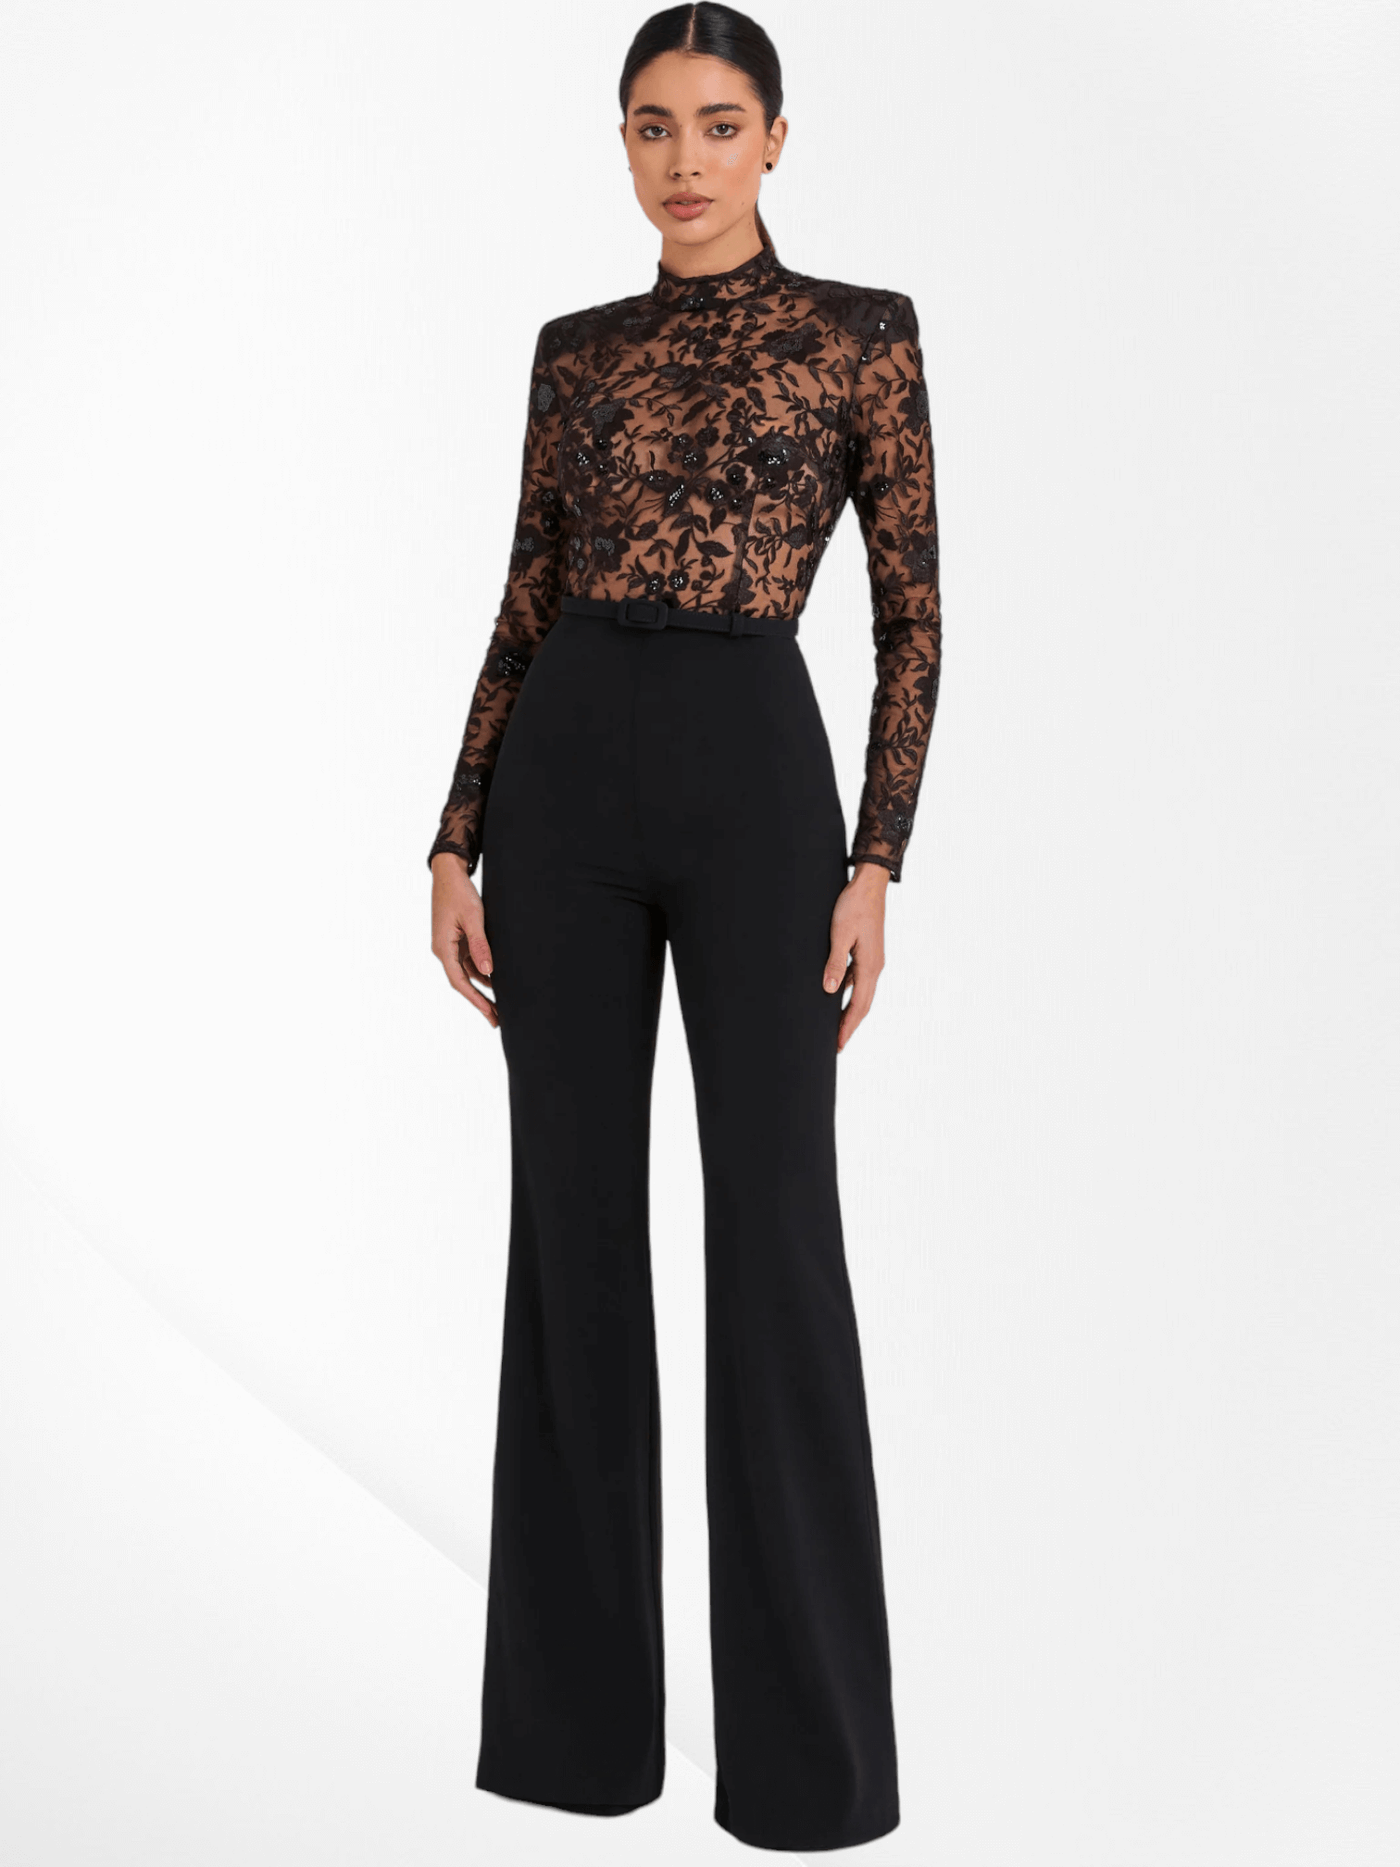 Long Sleeve Lace Sequin Jumpsuit: Glamorous Style for Special Events